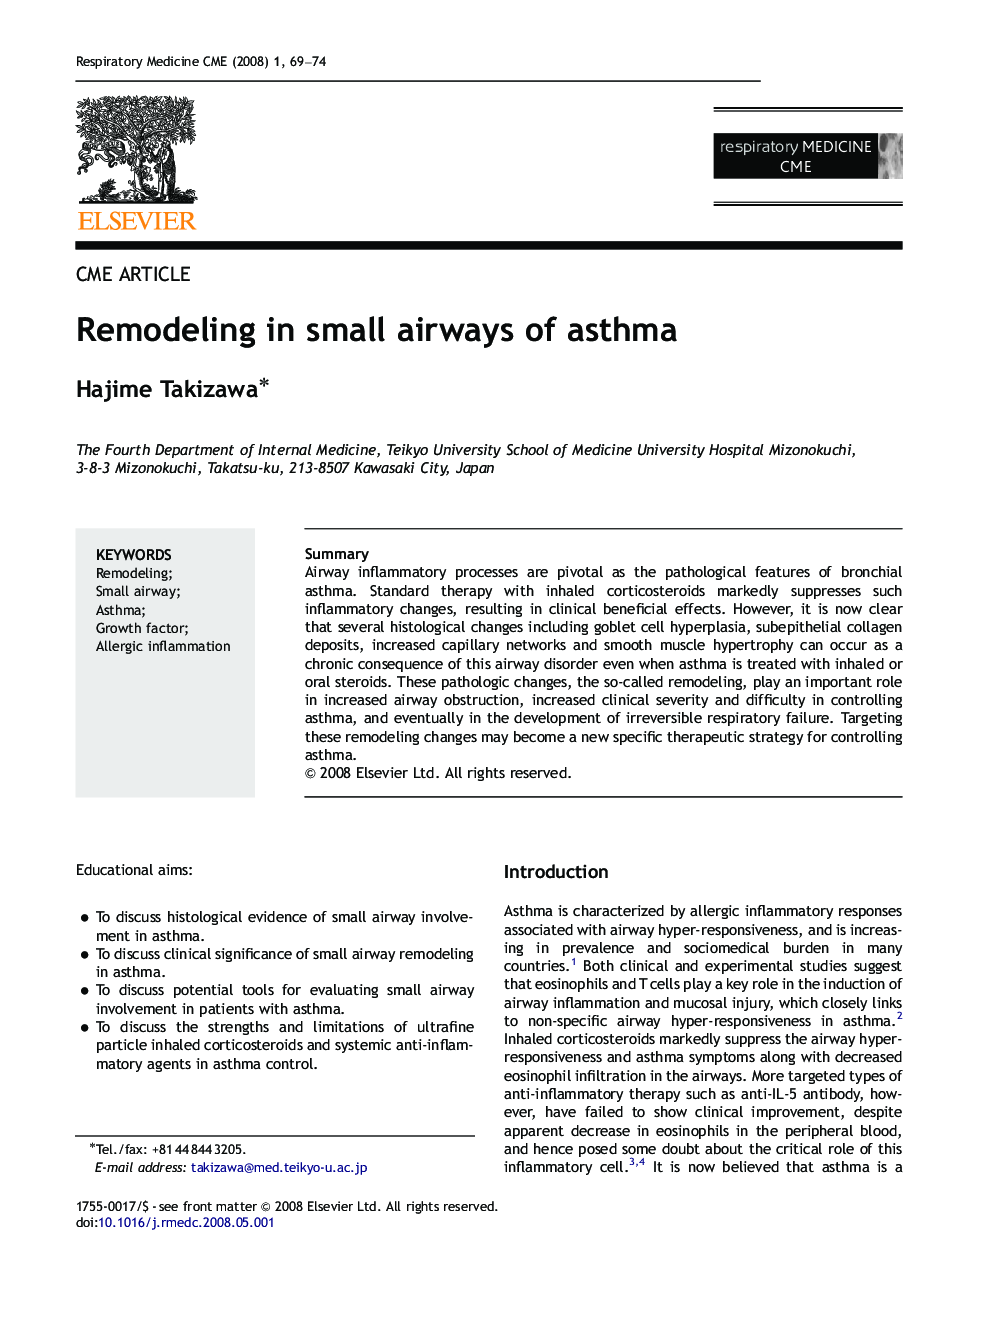 Remodeling in small airways of asthma